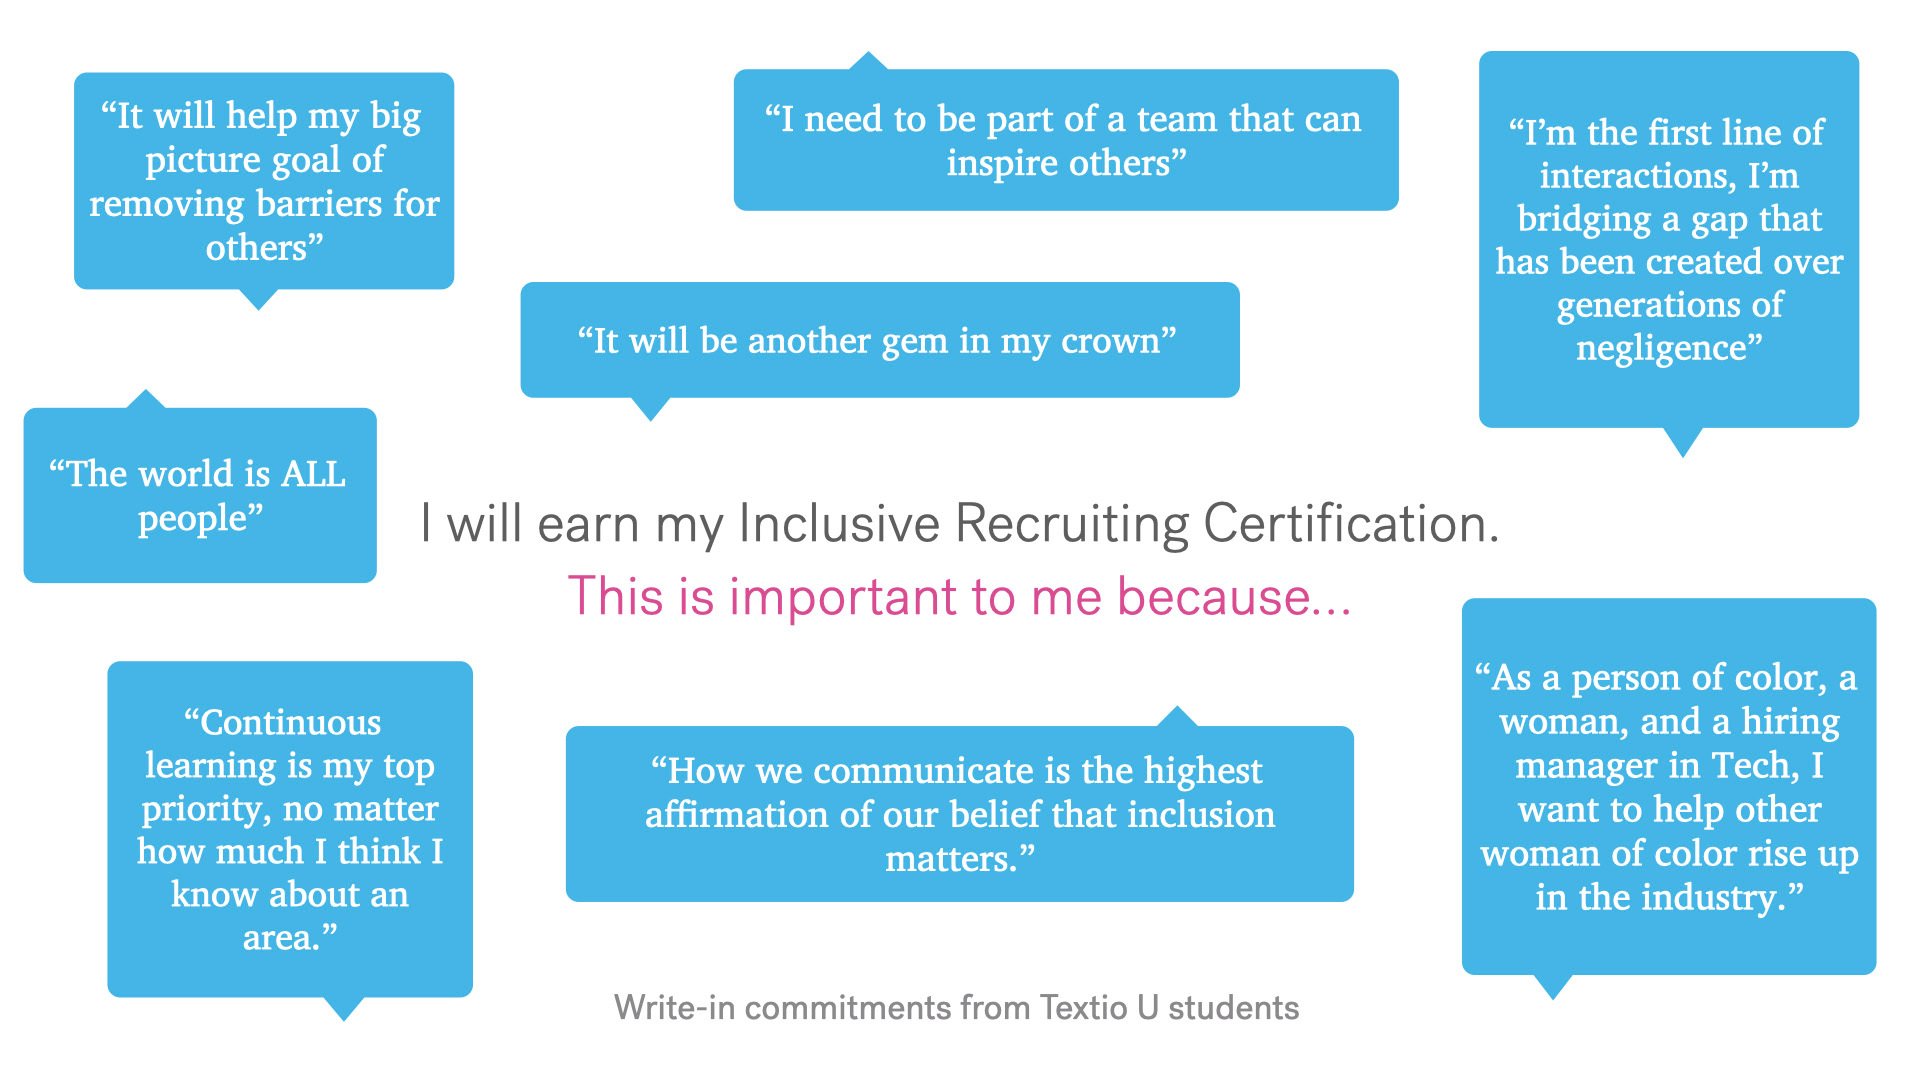 Graphic of speech bubbles with quotes from Textio U students completing the passage "I will earn my Inclusive Recruiting certification. This is important to me because..."